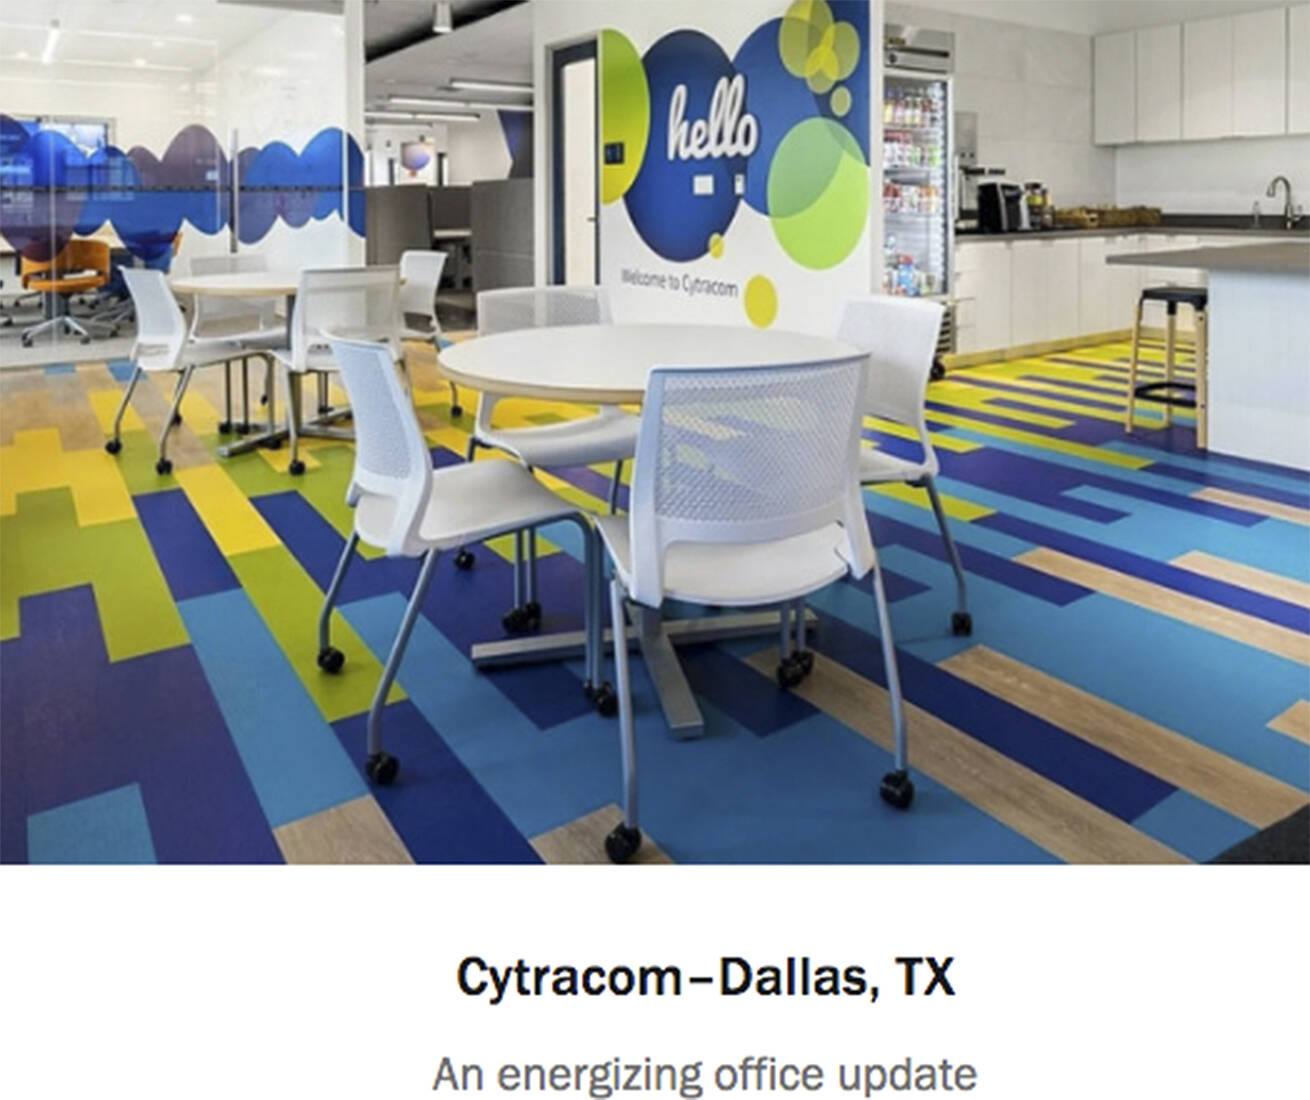 A colorful workspace in Dallas using Watson furniture. Courtesy photo